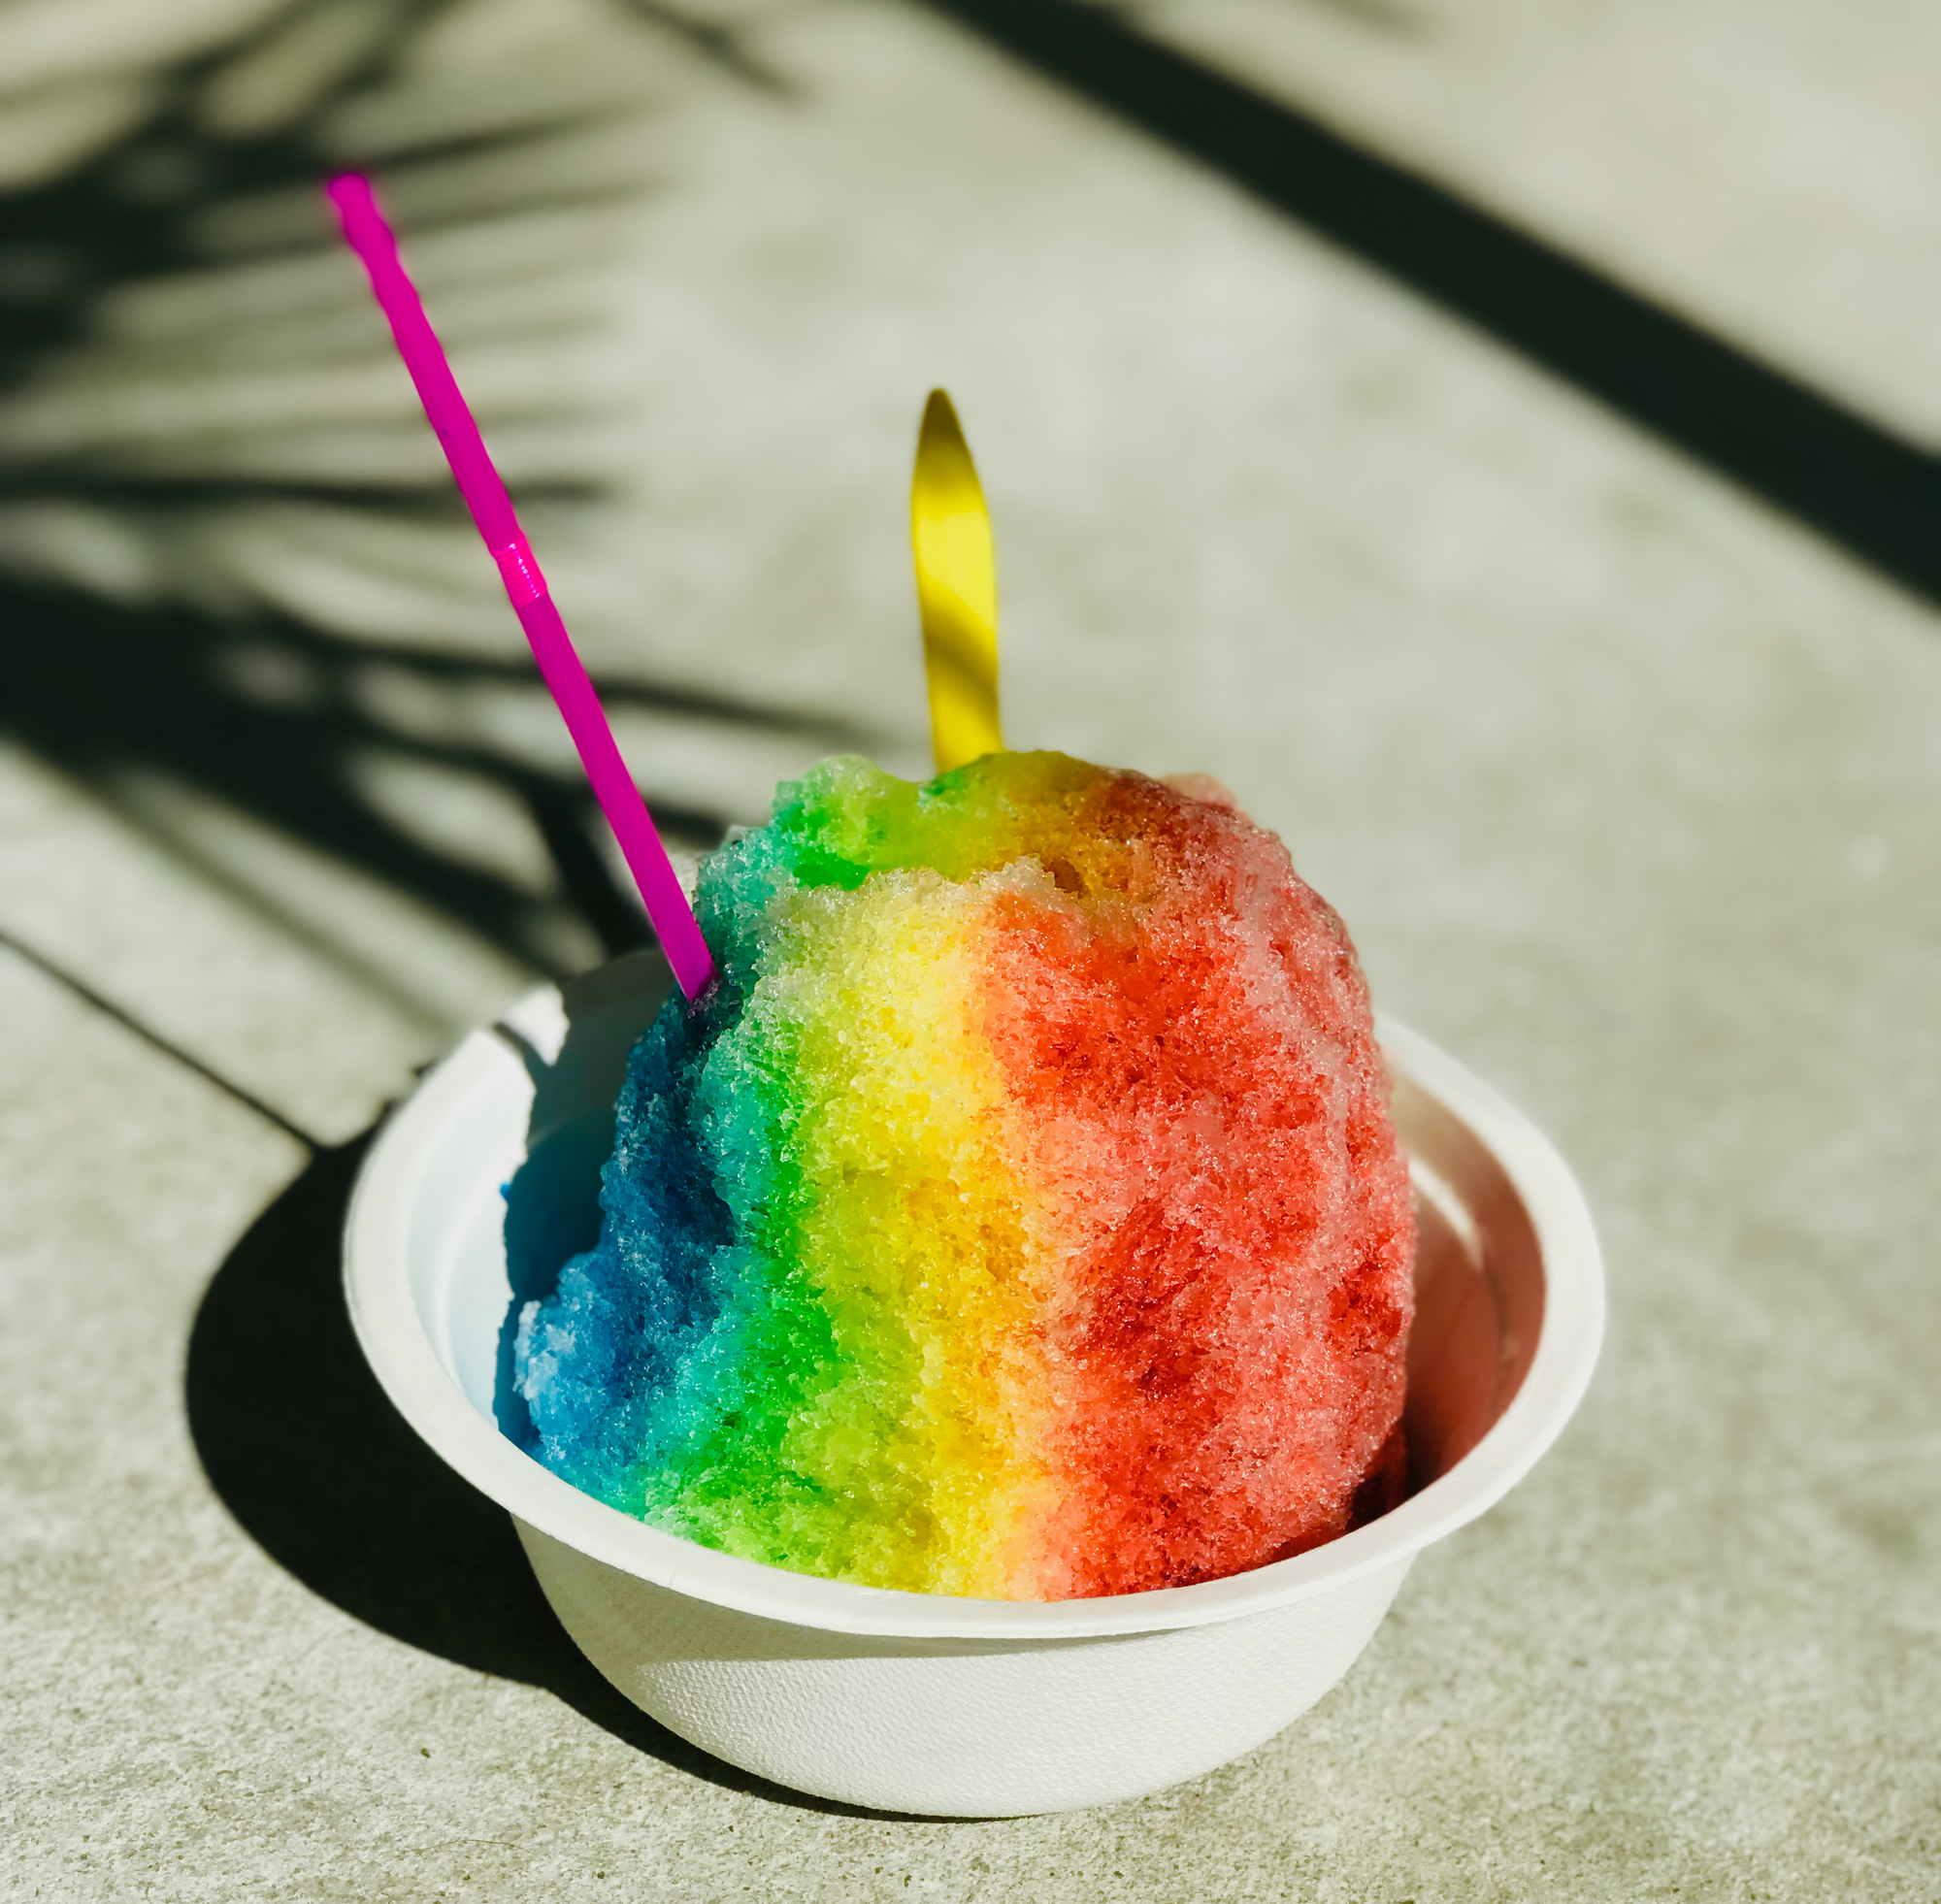 Shaved Ice, Hot Dogs, Vietnamese Noodles: North 3rd Street Market Welcomes New Vendors